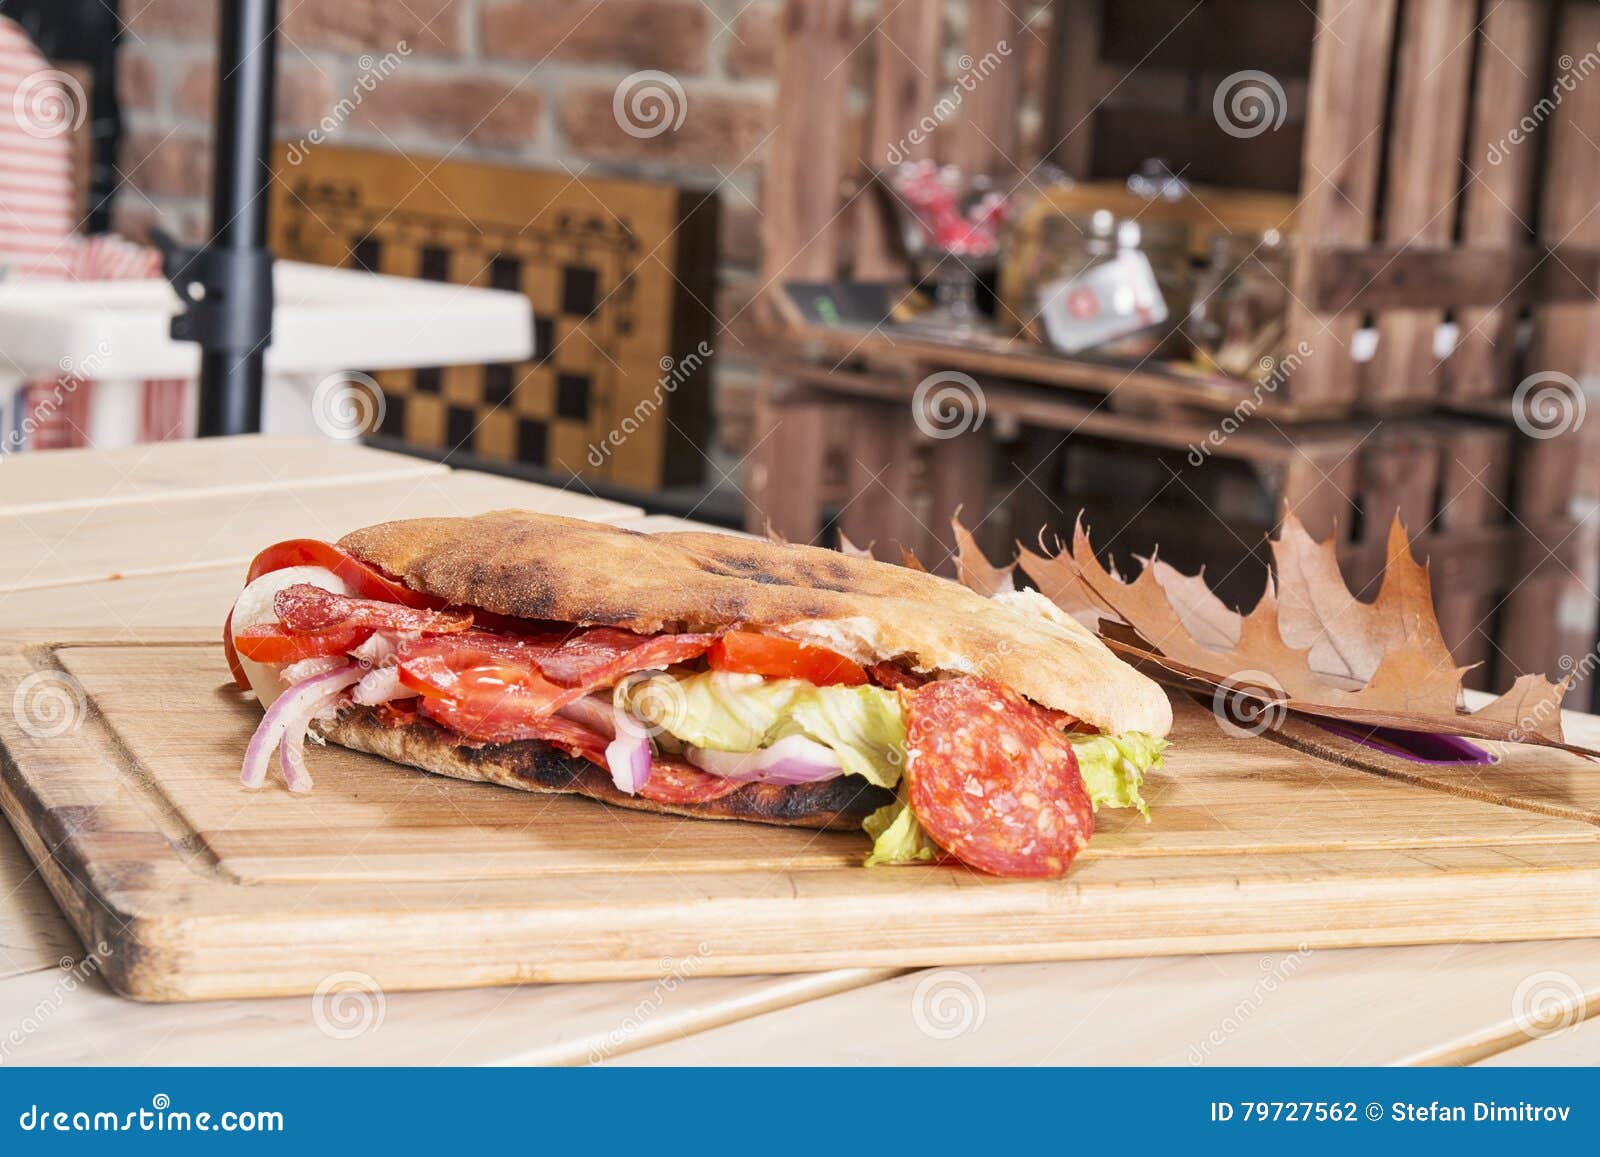 sandwich on the table with autumn decotarion